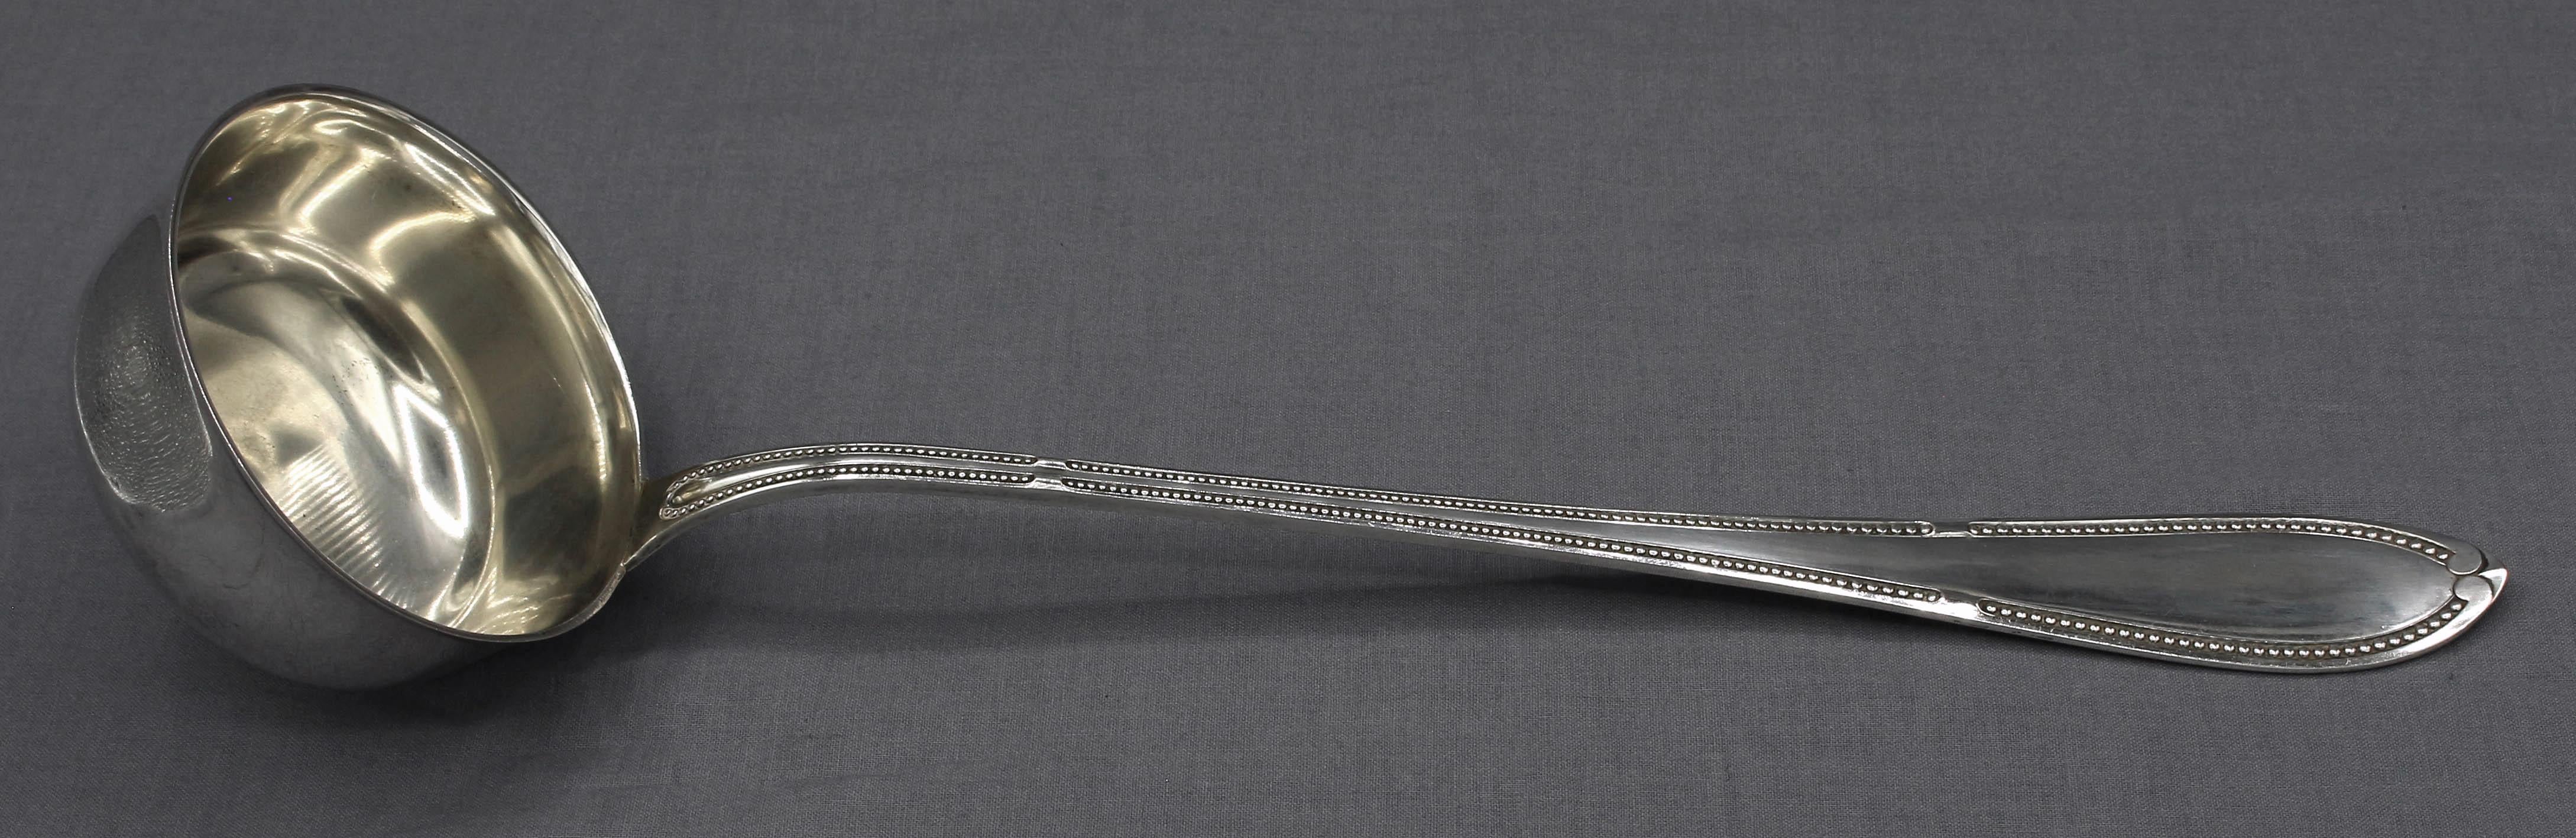 Later 19th century German 800 silver standard punch ladle by Adolf Lewin. Boldly, elegant; beaded, pointed tip. Crown & moon marks. Never engraved. Fine condition. 6.95 troy oz.
13